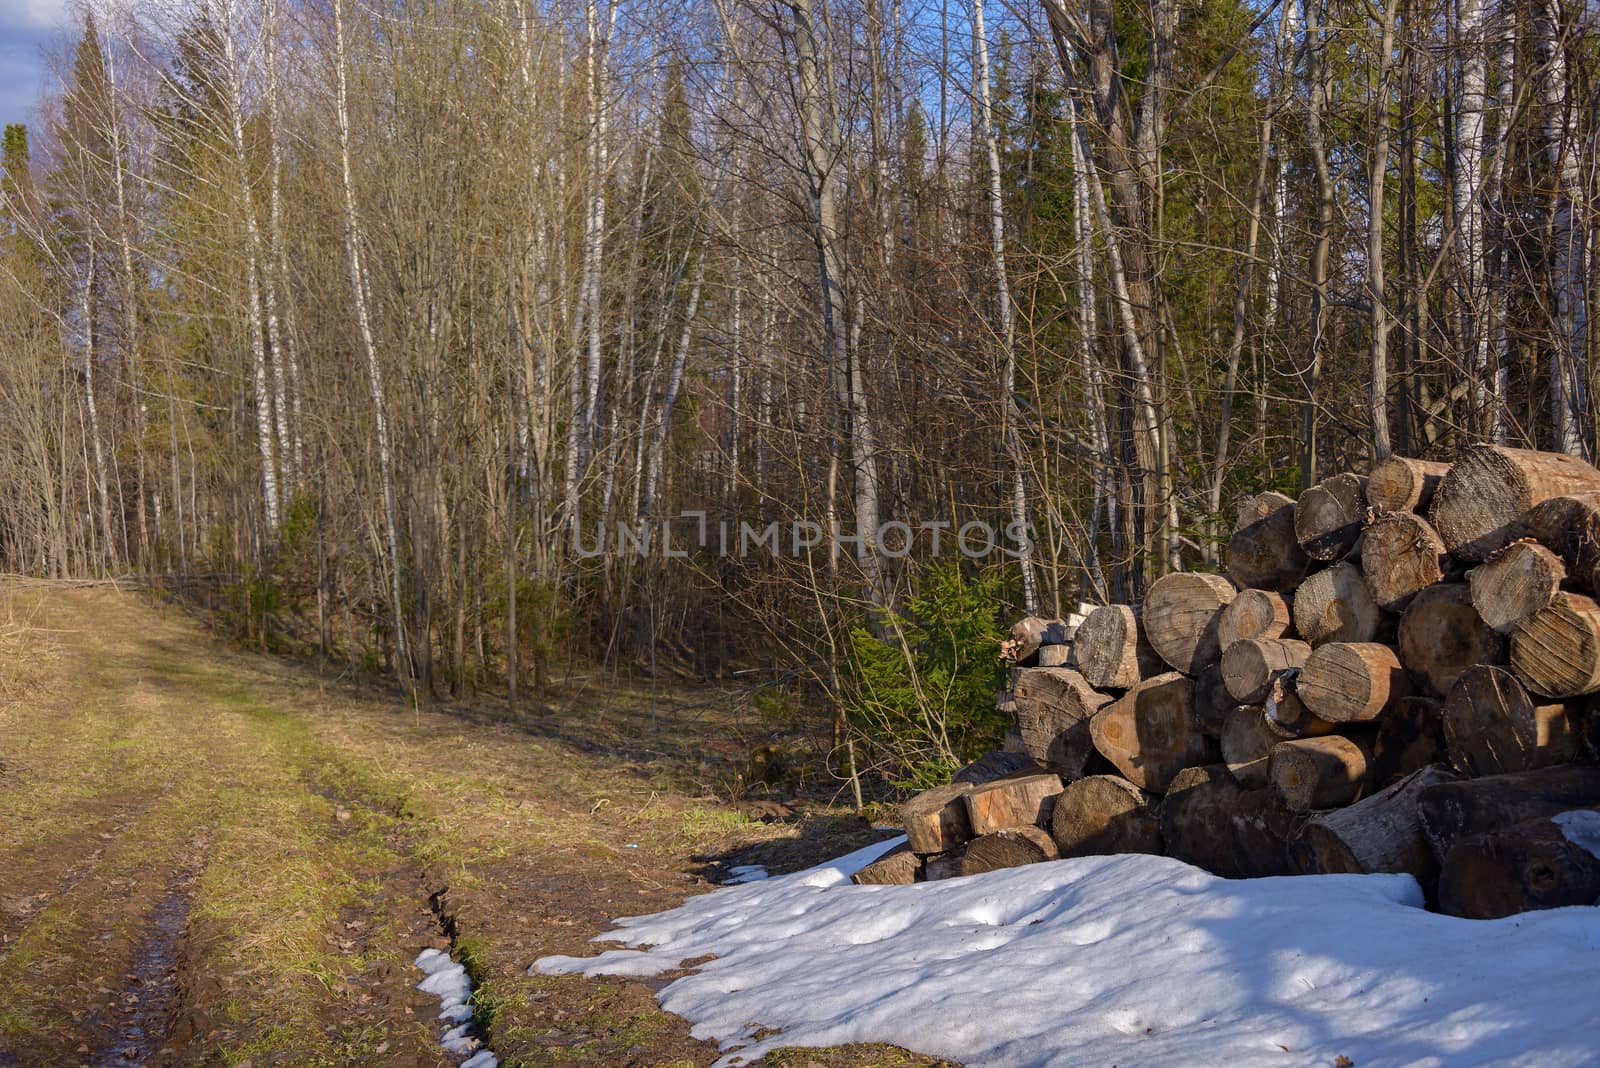 Round sawn firewood in the snow by a forest road on a spring day.